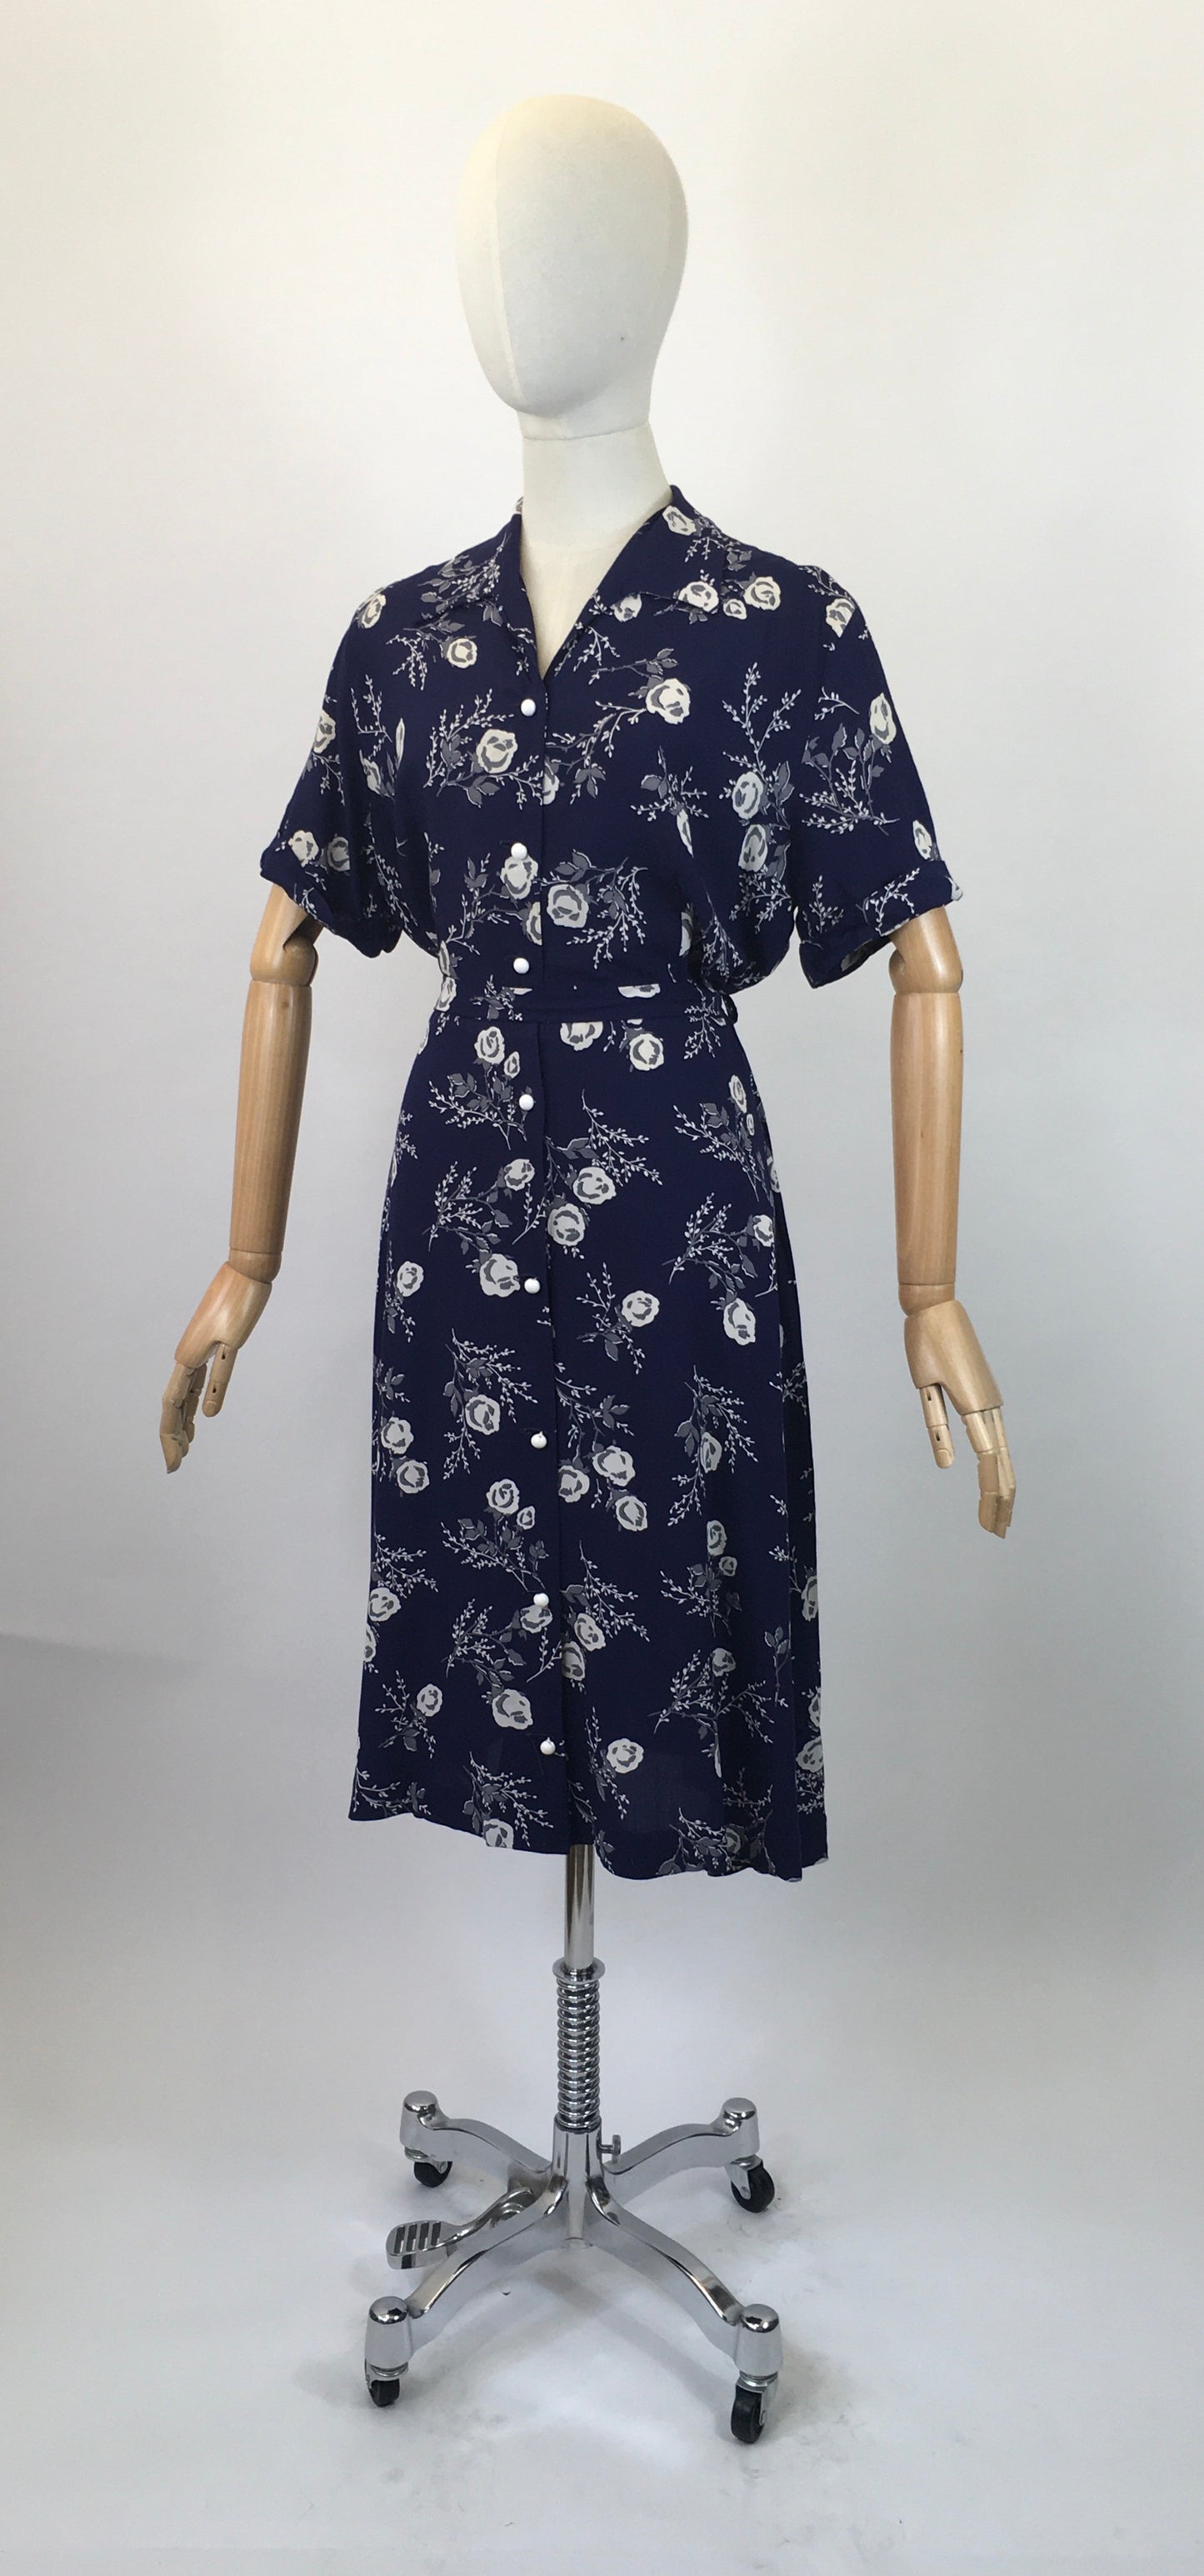 Original 1940’s Floral Cotton Shirtwaister dress - In hues of Cream and grey flowers